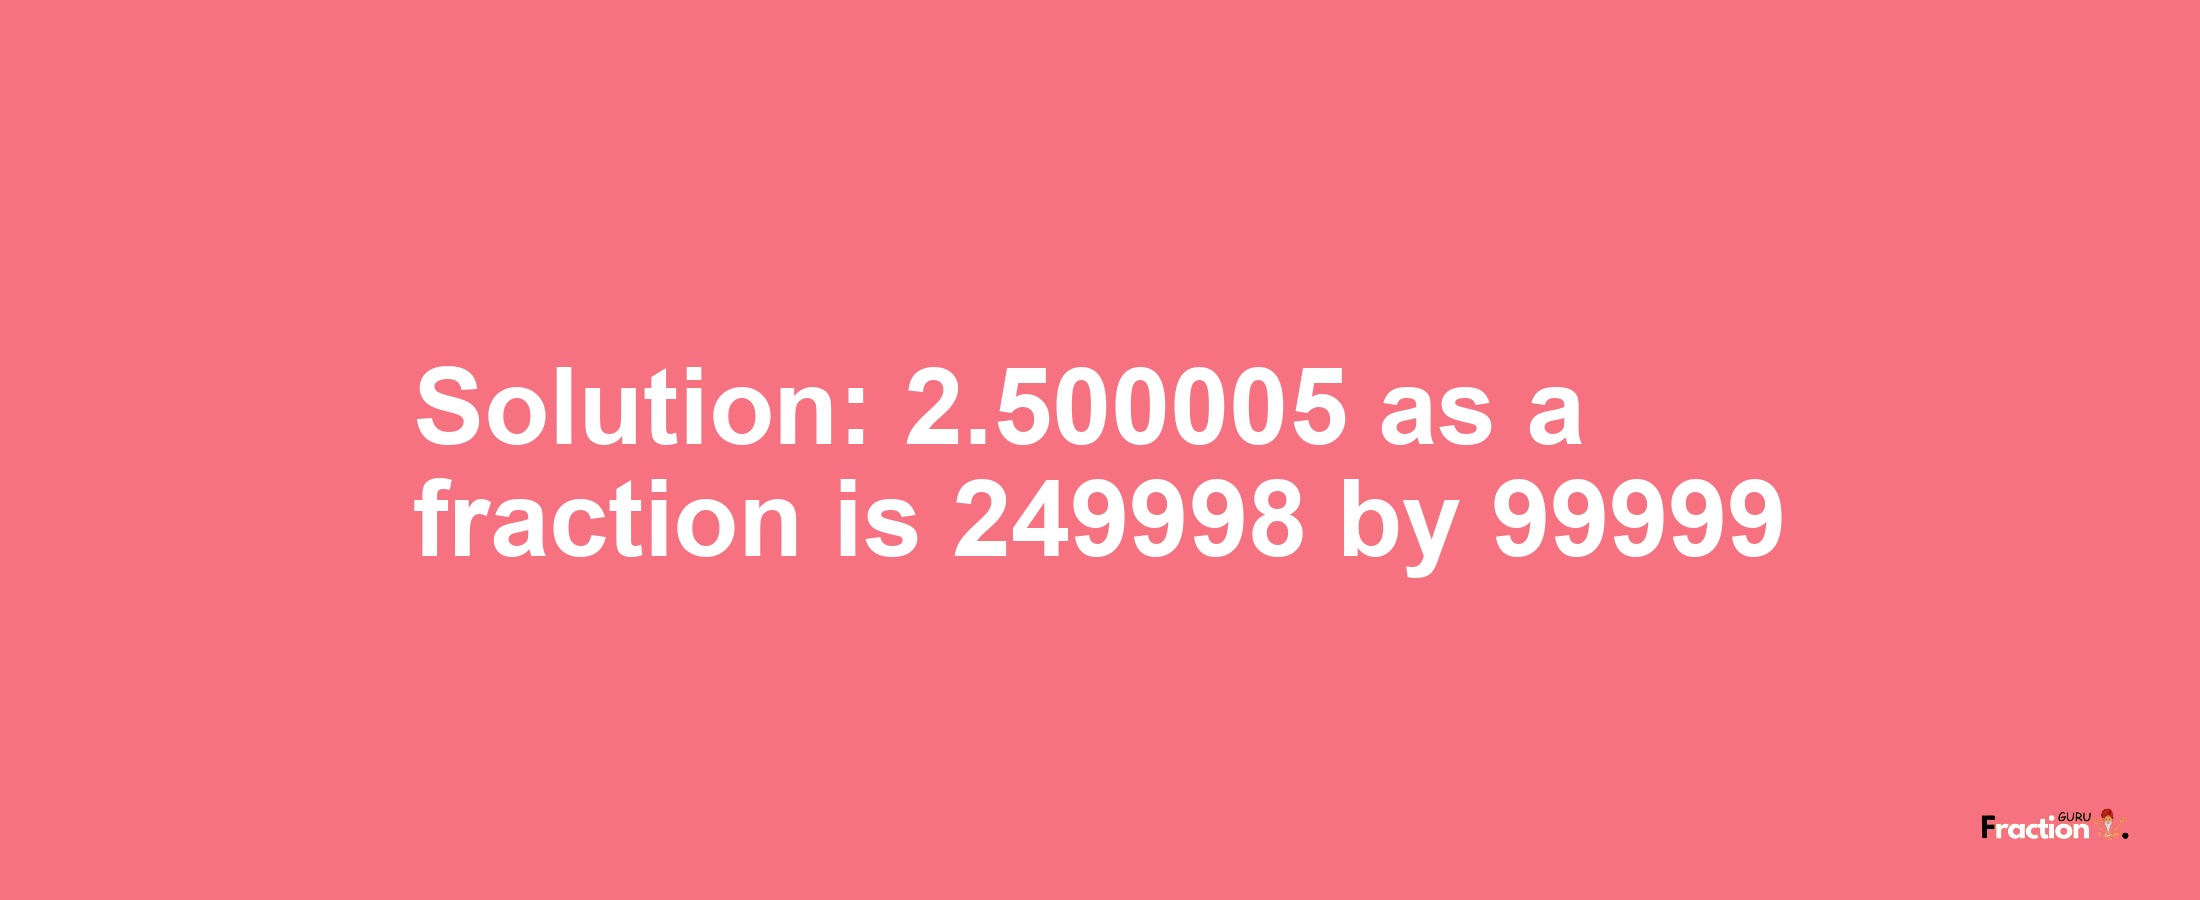 Solution:2.500005 as a fraction is 249998/99999